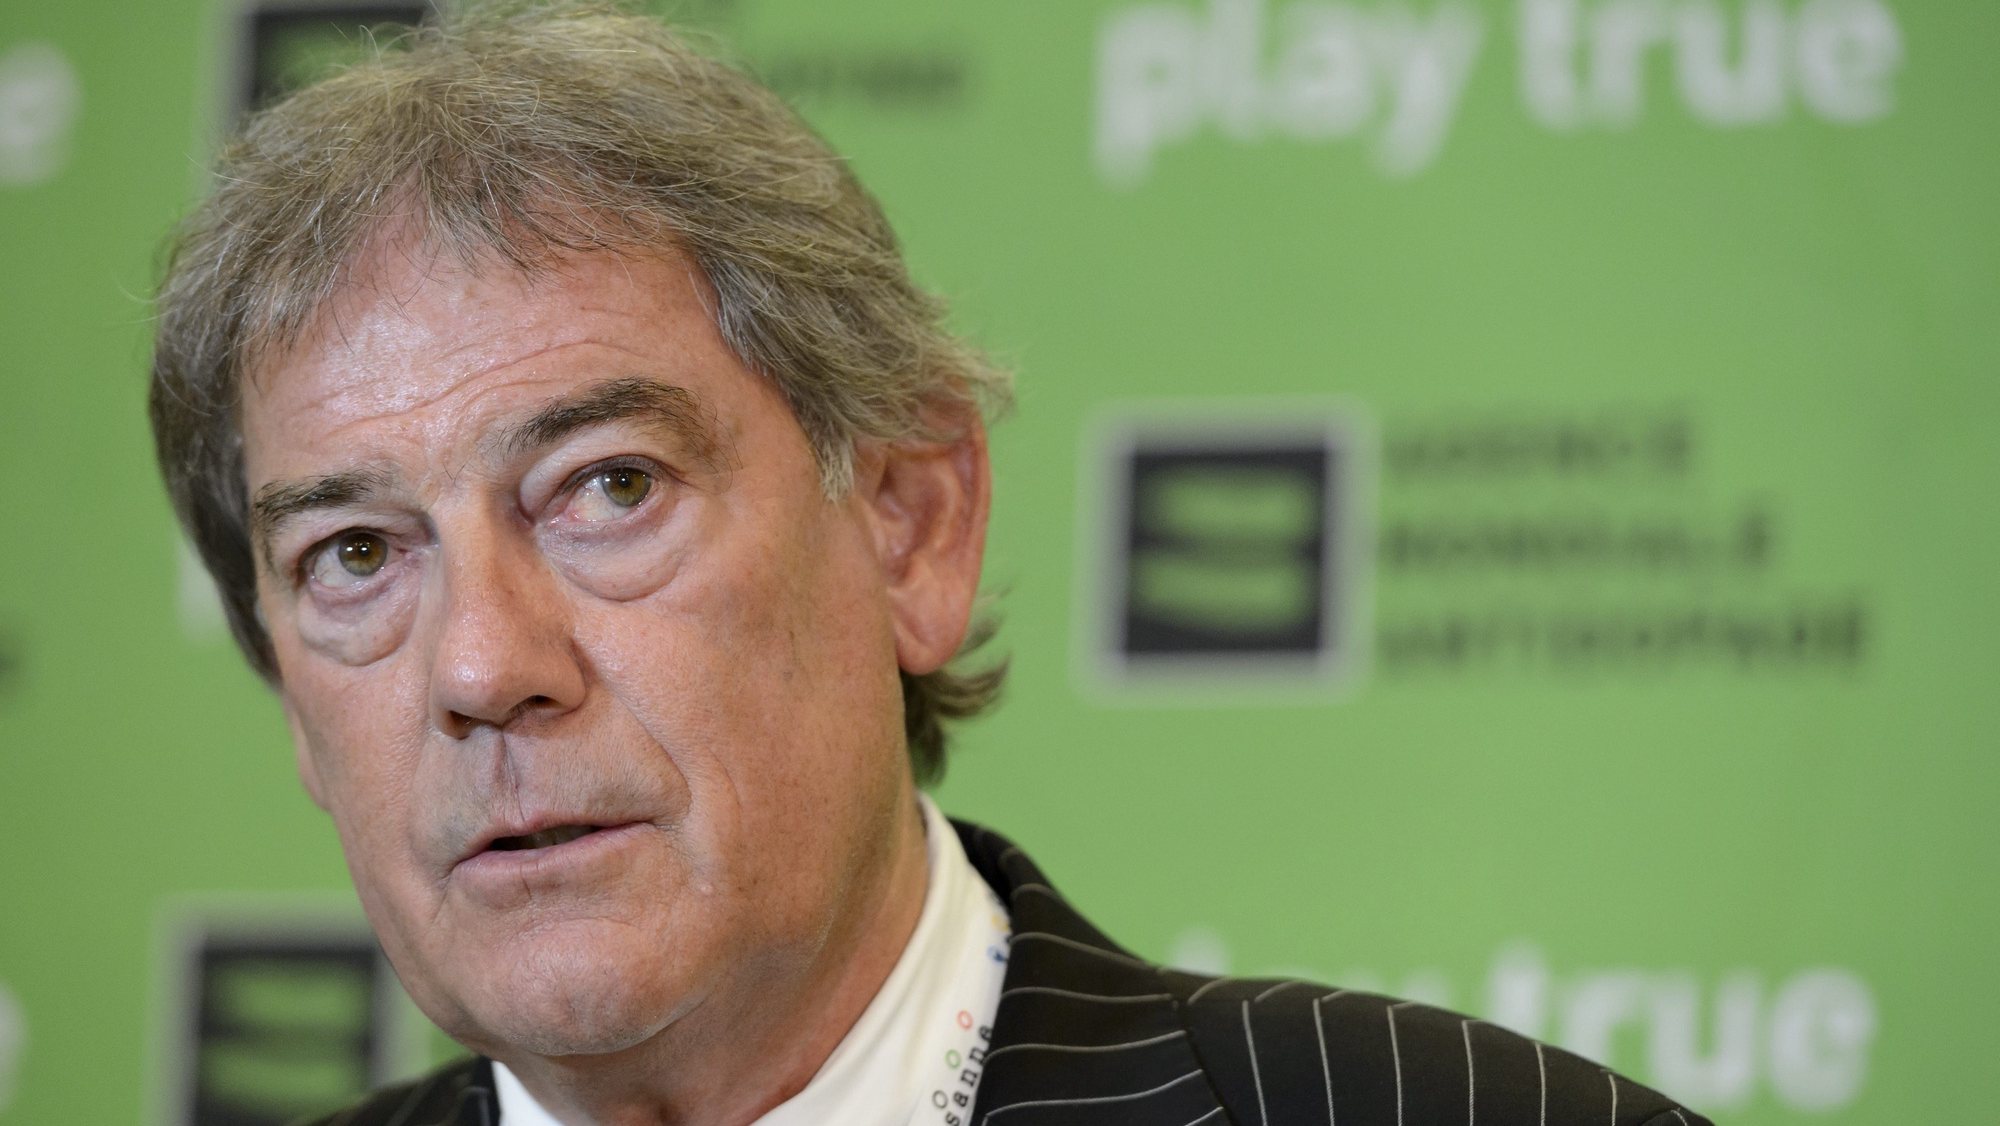 epa05211188 David Howman, from New Zealand, Director General of the WADA speaks during a press conference during the WADA Symposium for Anti-Doping Organizations (ADOs), in Lausanne, Switzerland, 14 March 2016.  EPA/LAURENT GILLIERON